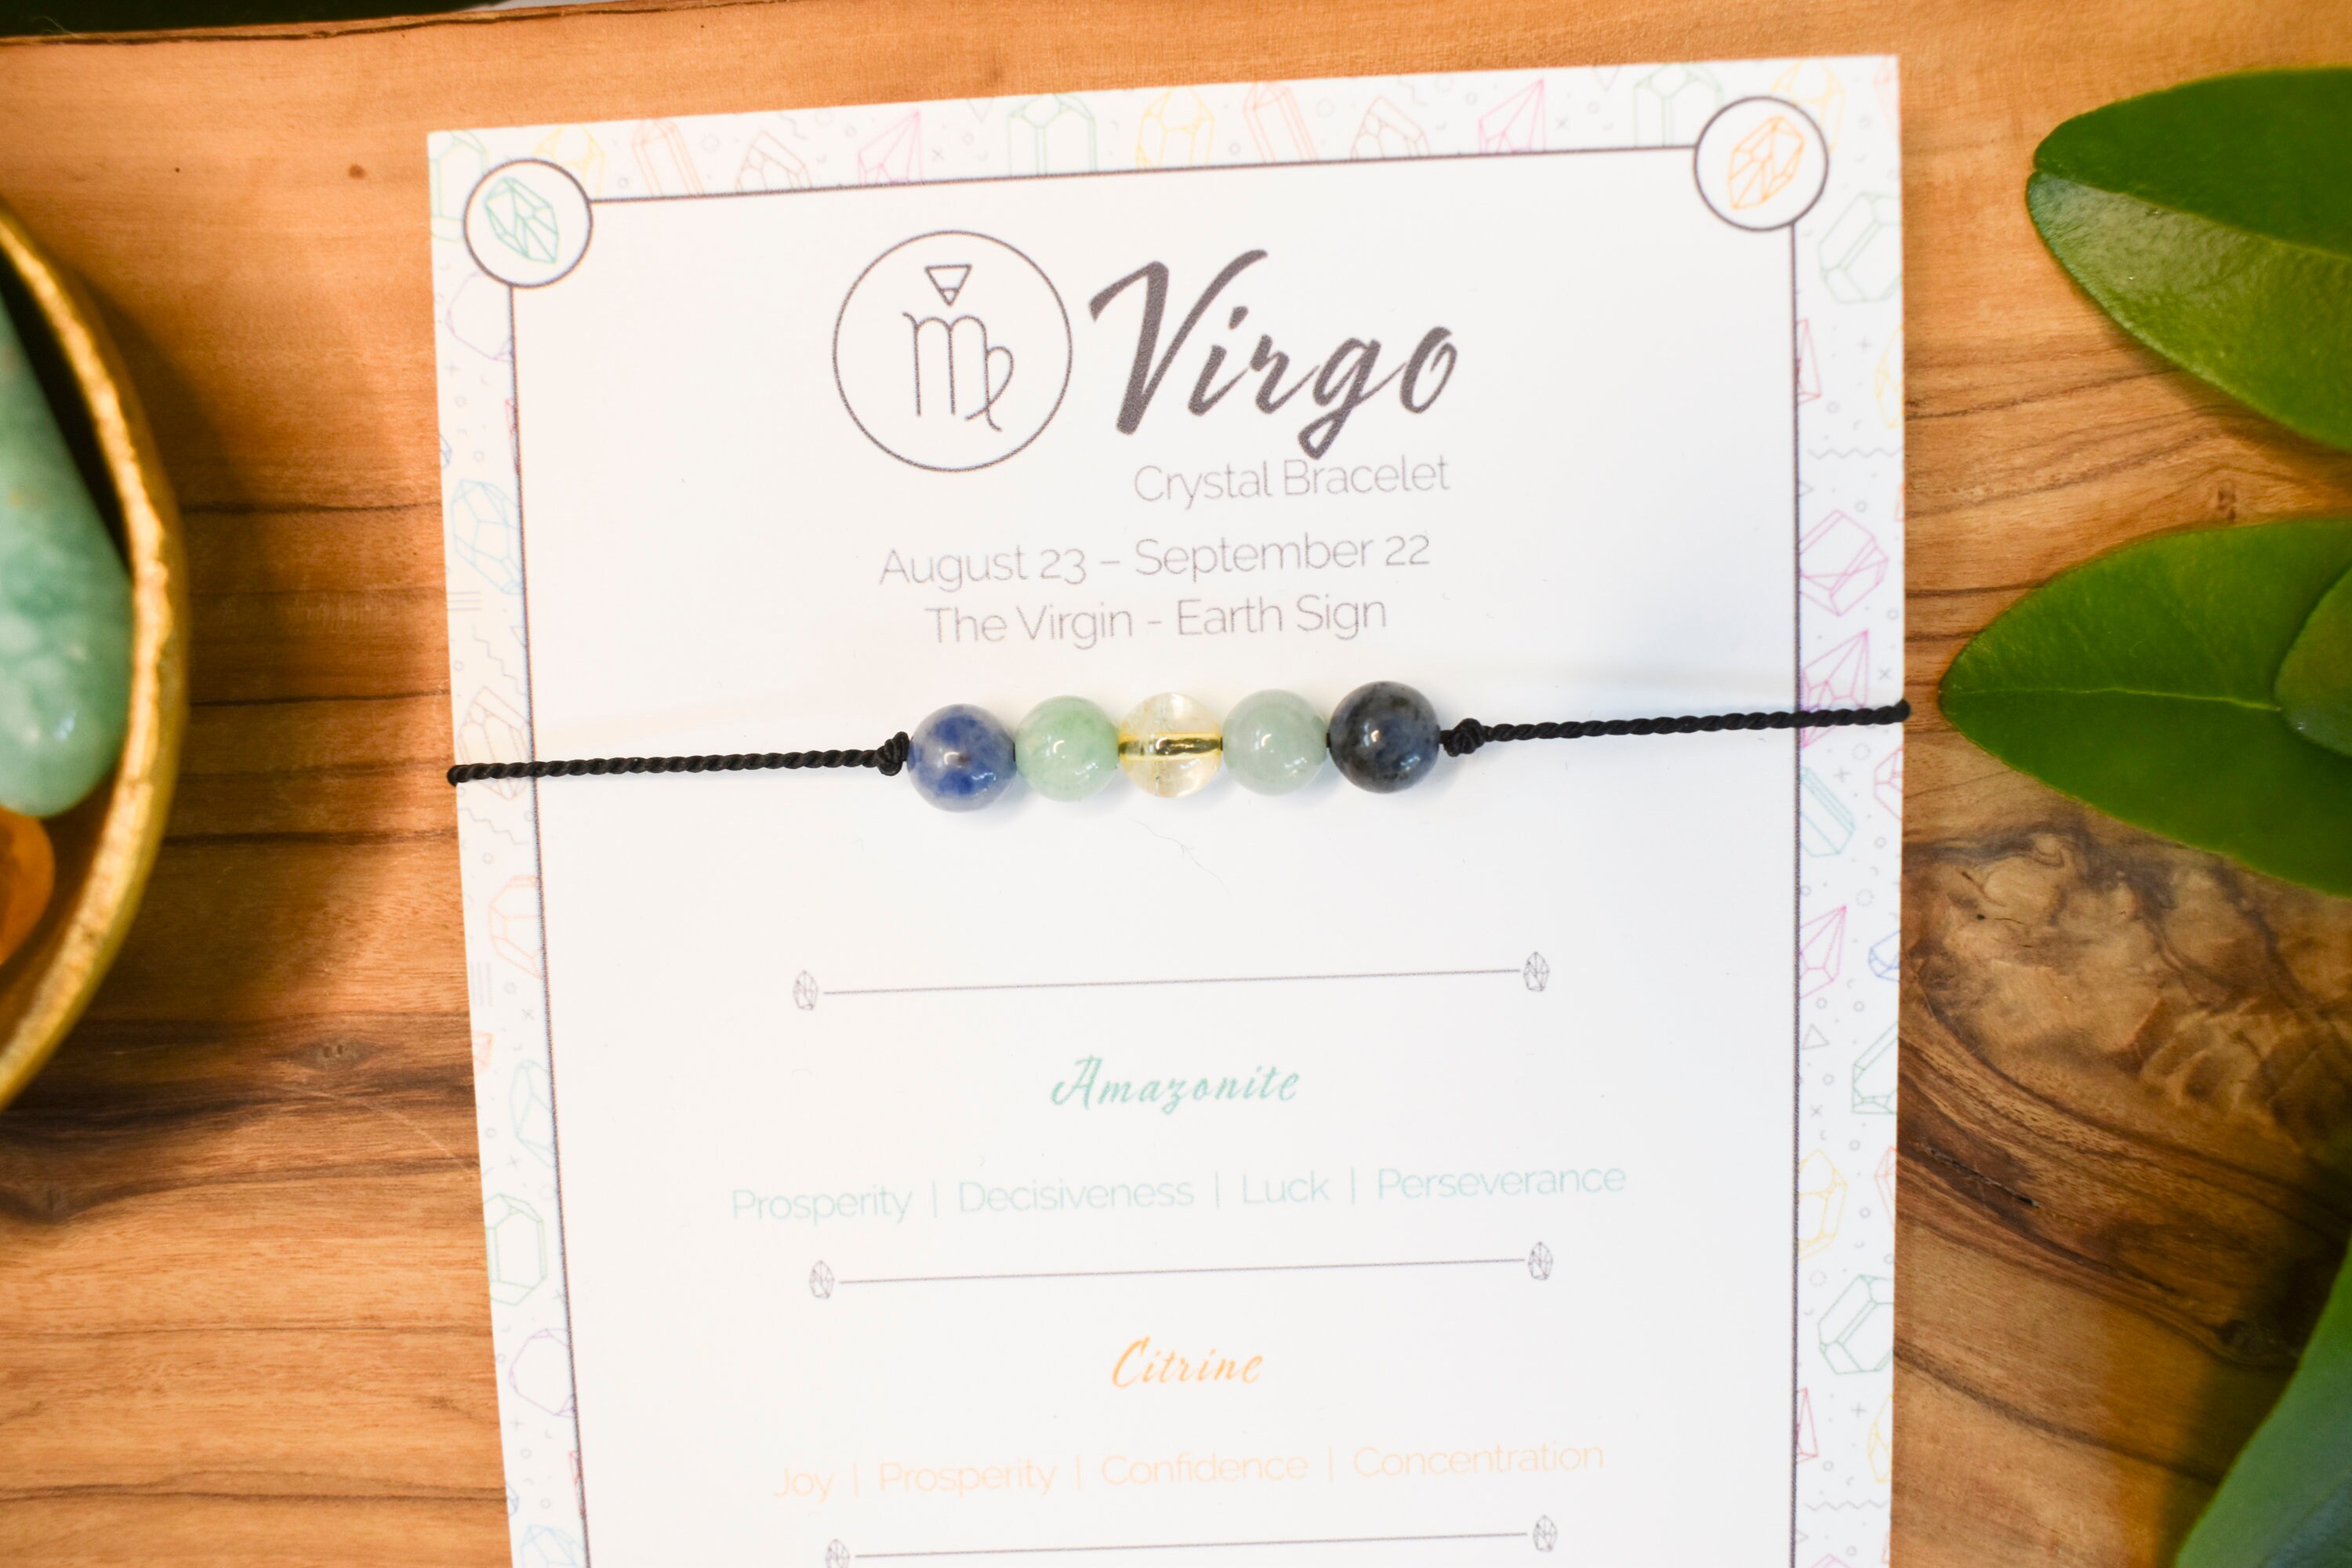 Virgo Crystals: Top 10 Crystals For Virgo To be Their Best